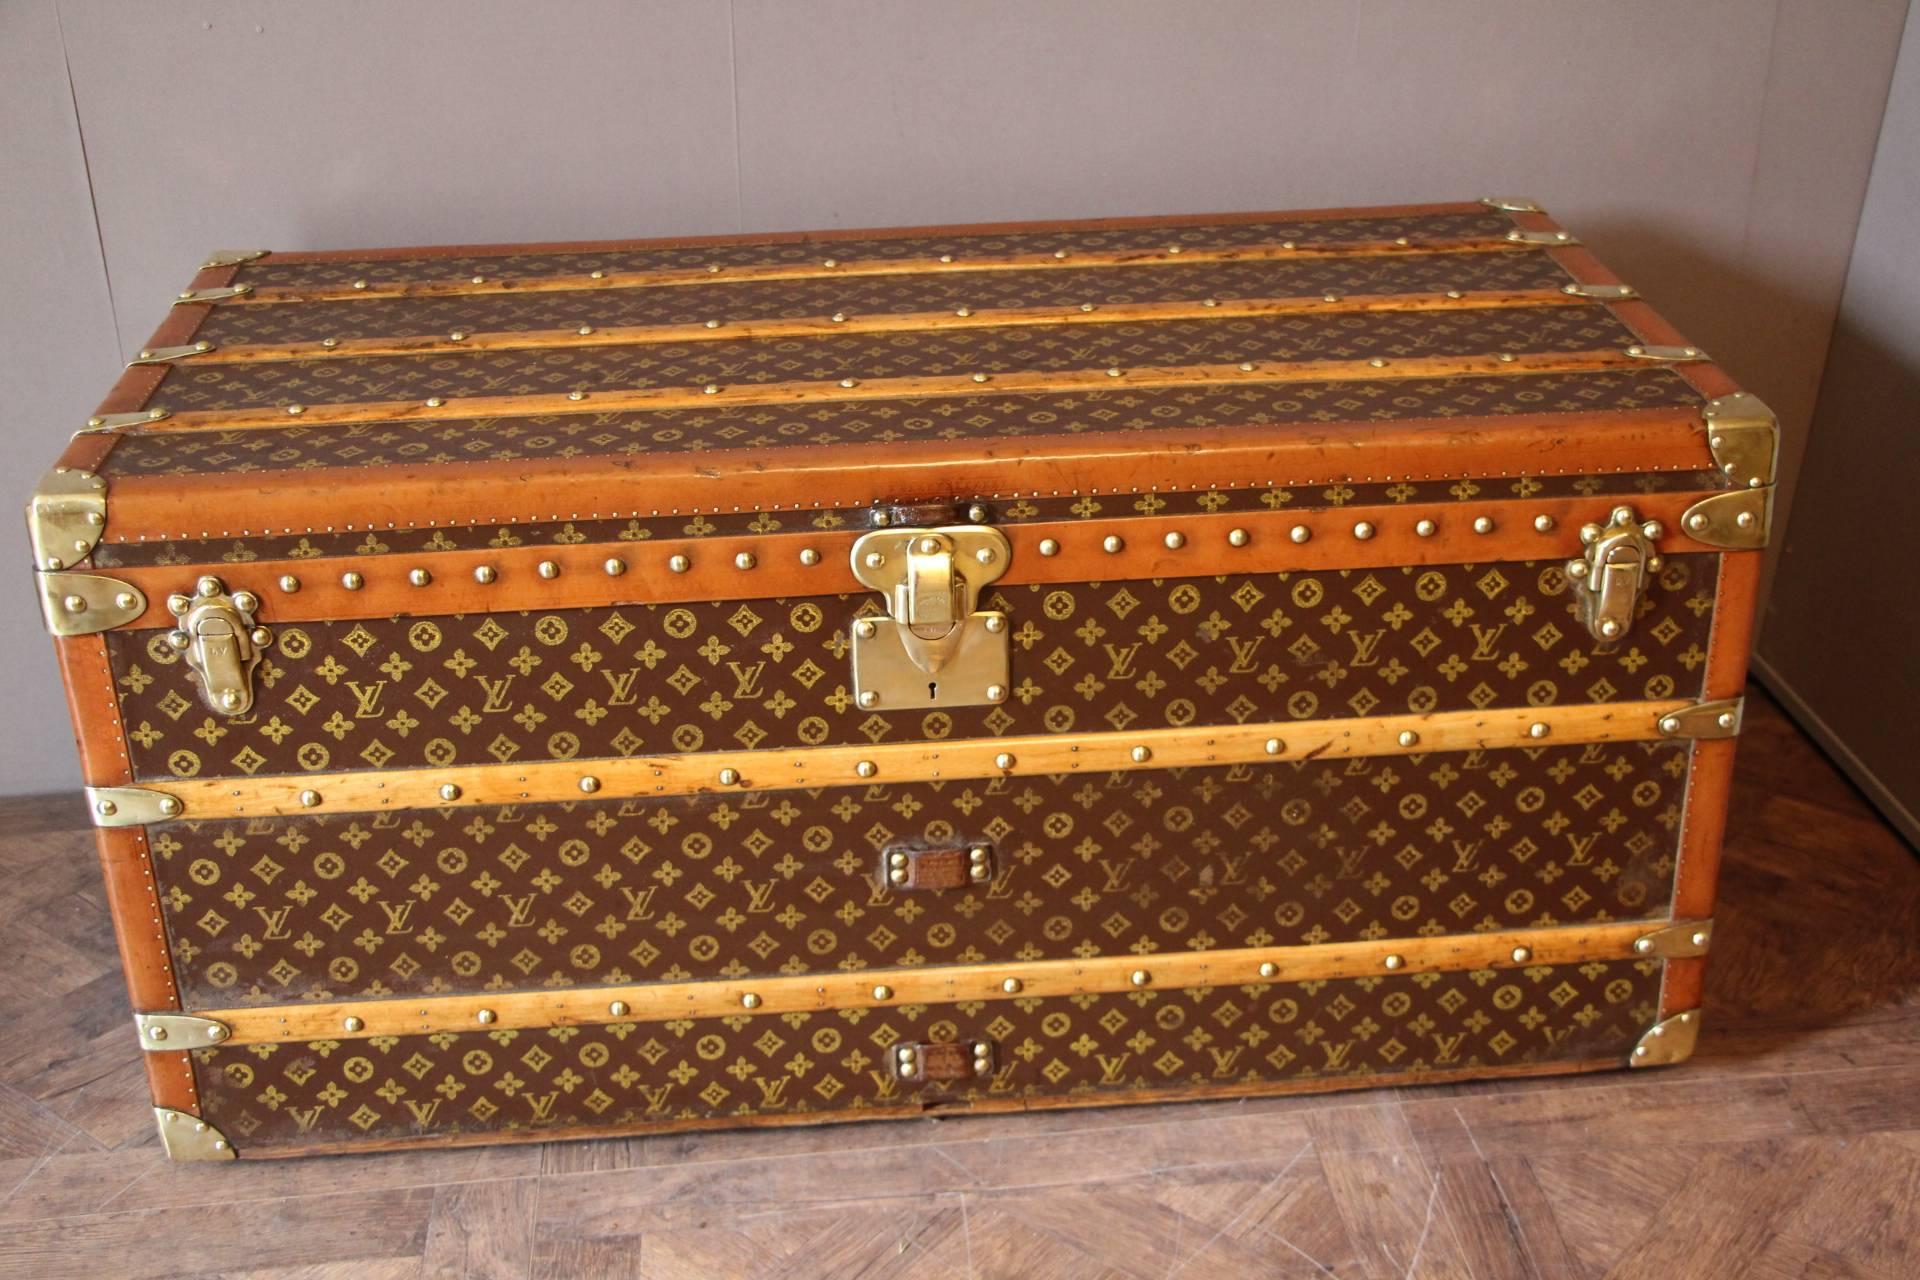 This superb Louis Vuitton steamer trunk features stenciled monogramm canvas, lozine trim, LV stamped solid brass locks and studs as well as leather side handles and brass corners. It has got a beautiful original patina and is very elegant.
Its